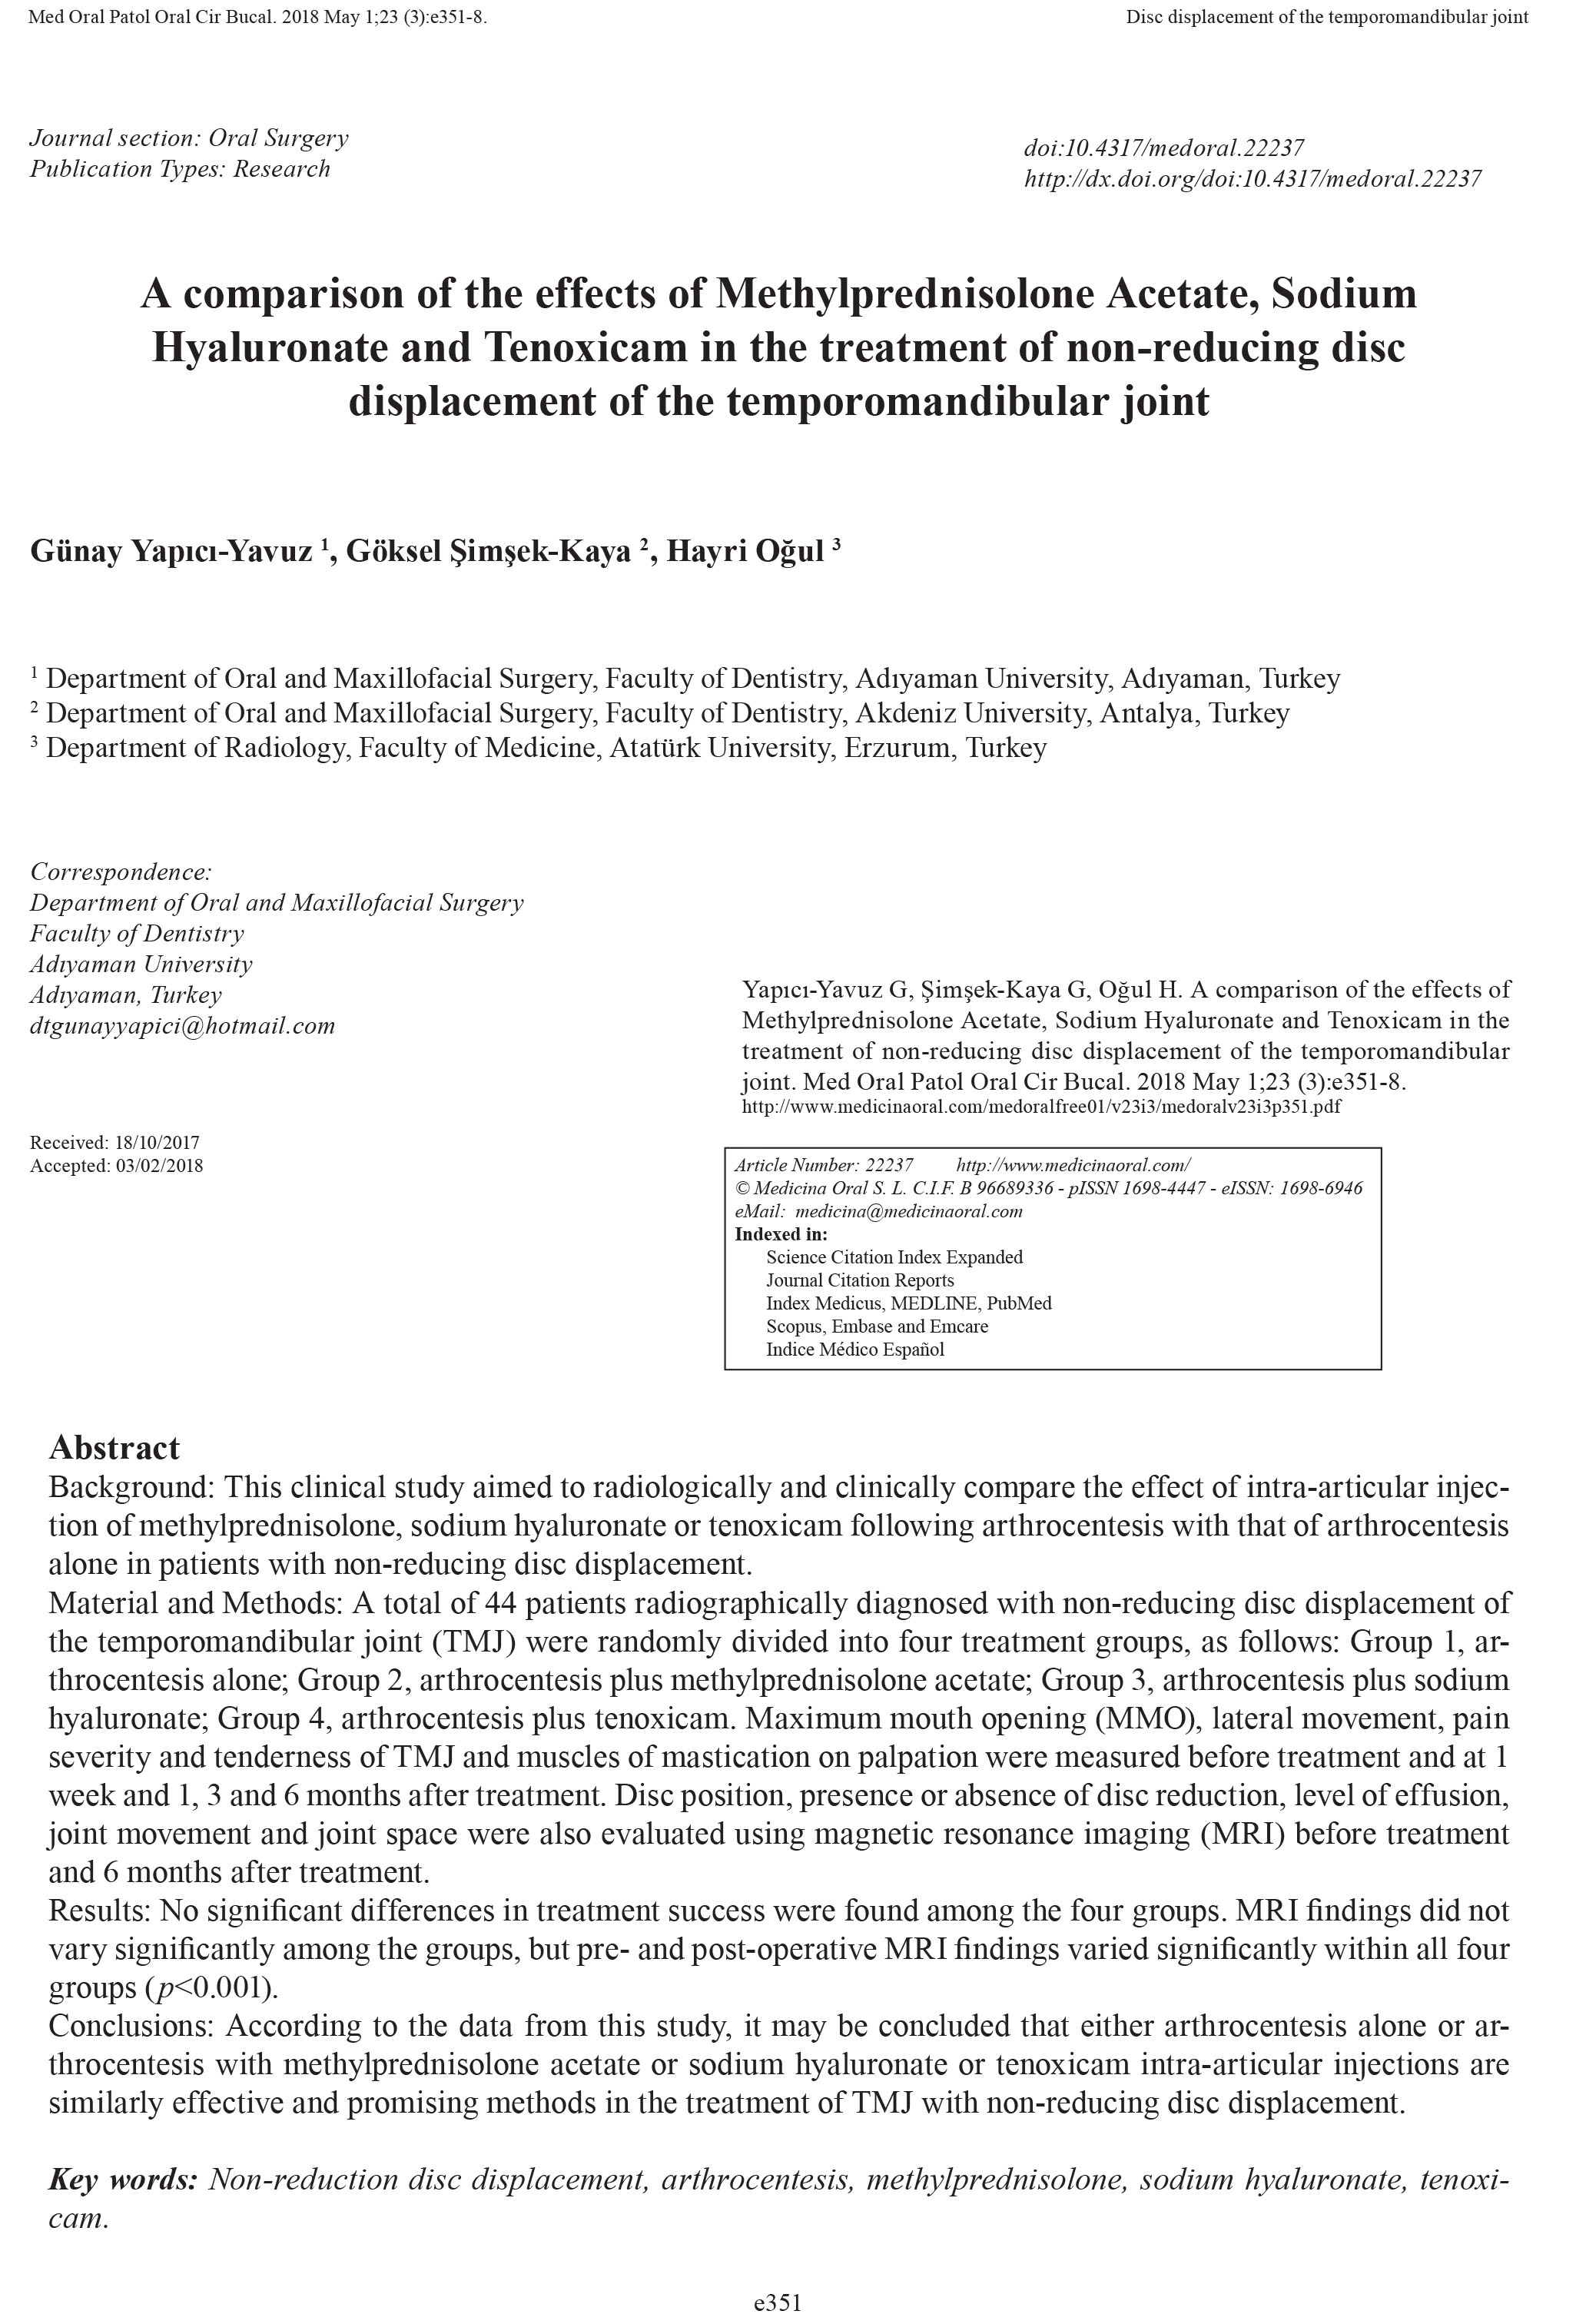 A-comparison-of-the-effects-of-Methylprednisolone-Acetate-Sodium-Hyaluronate-and-Tenoxicam-in-the-treatment-of-non-reducing-disc-displacement-of-the-temporomandibular-joint-1.jpg